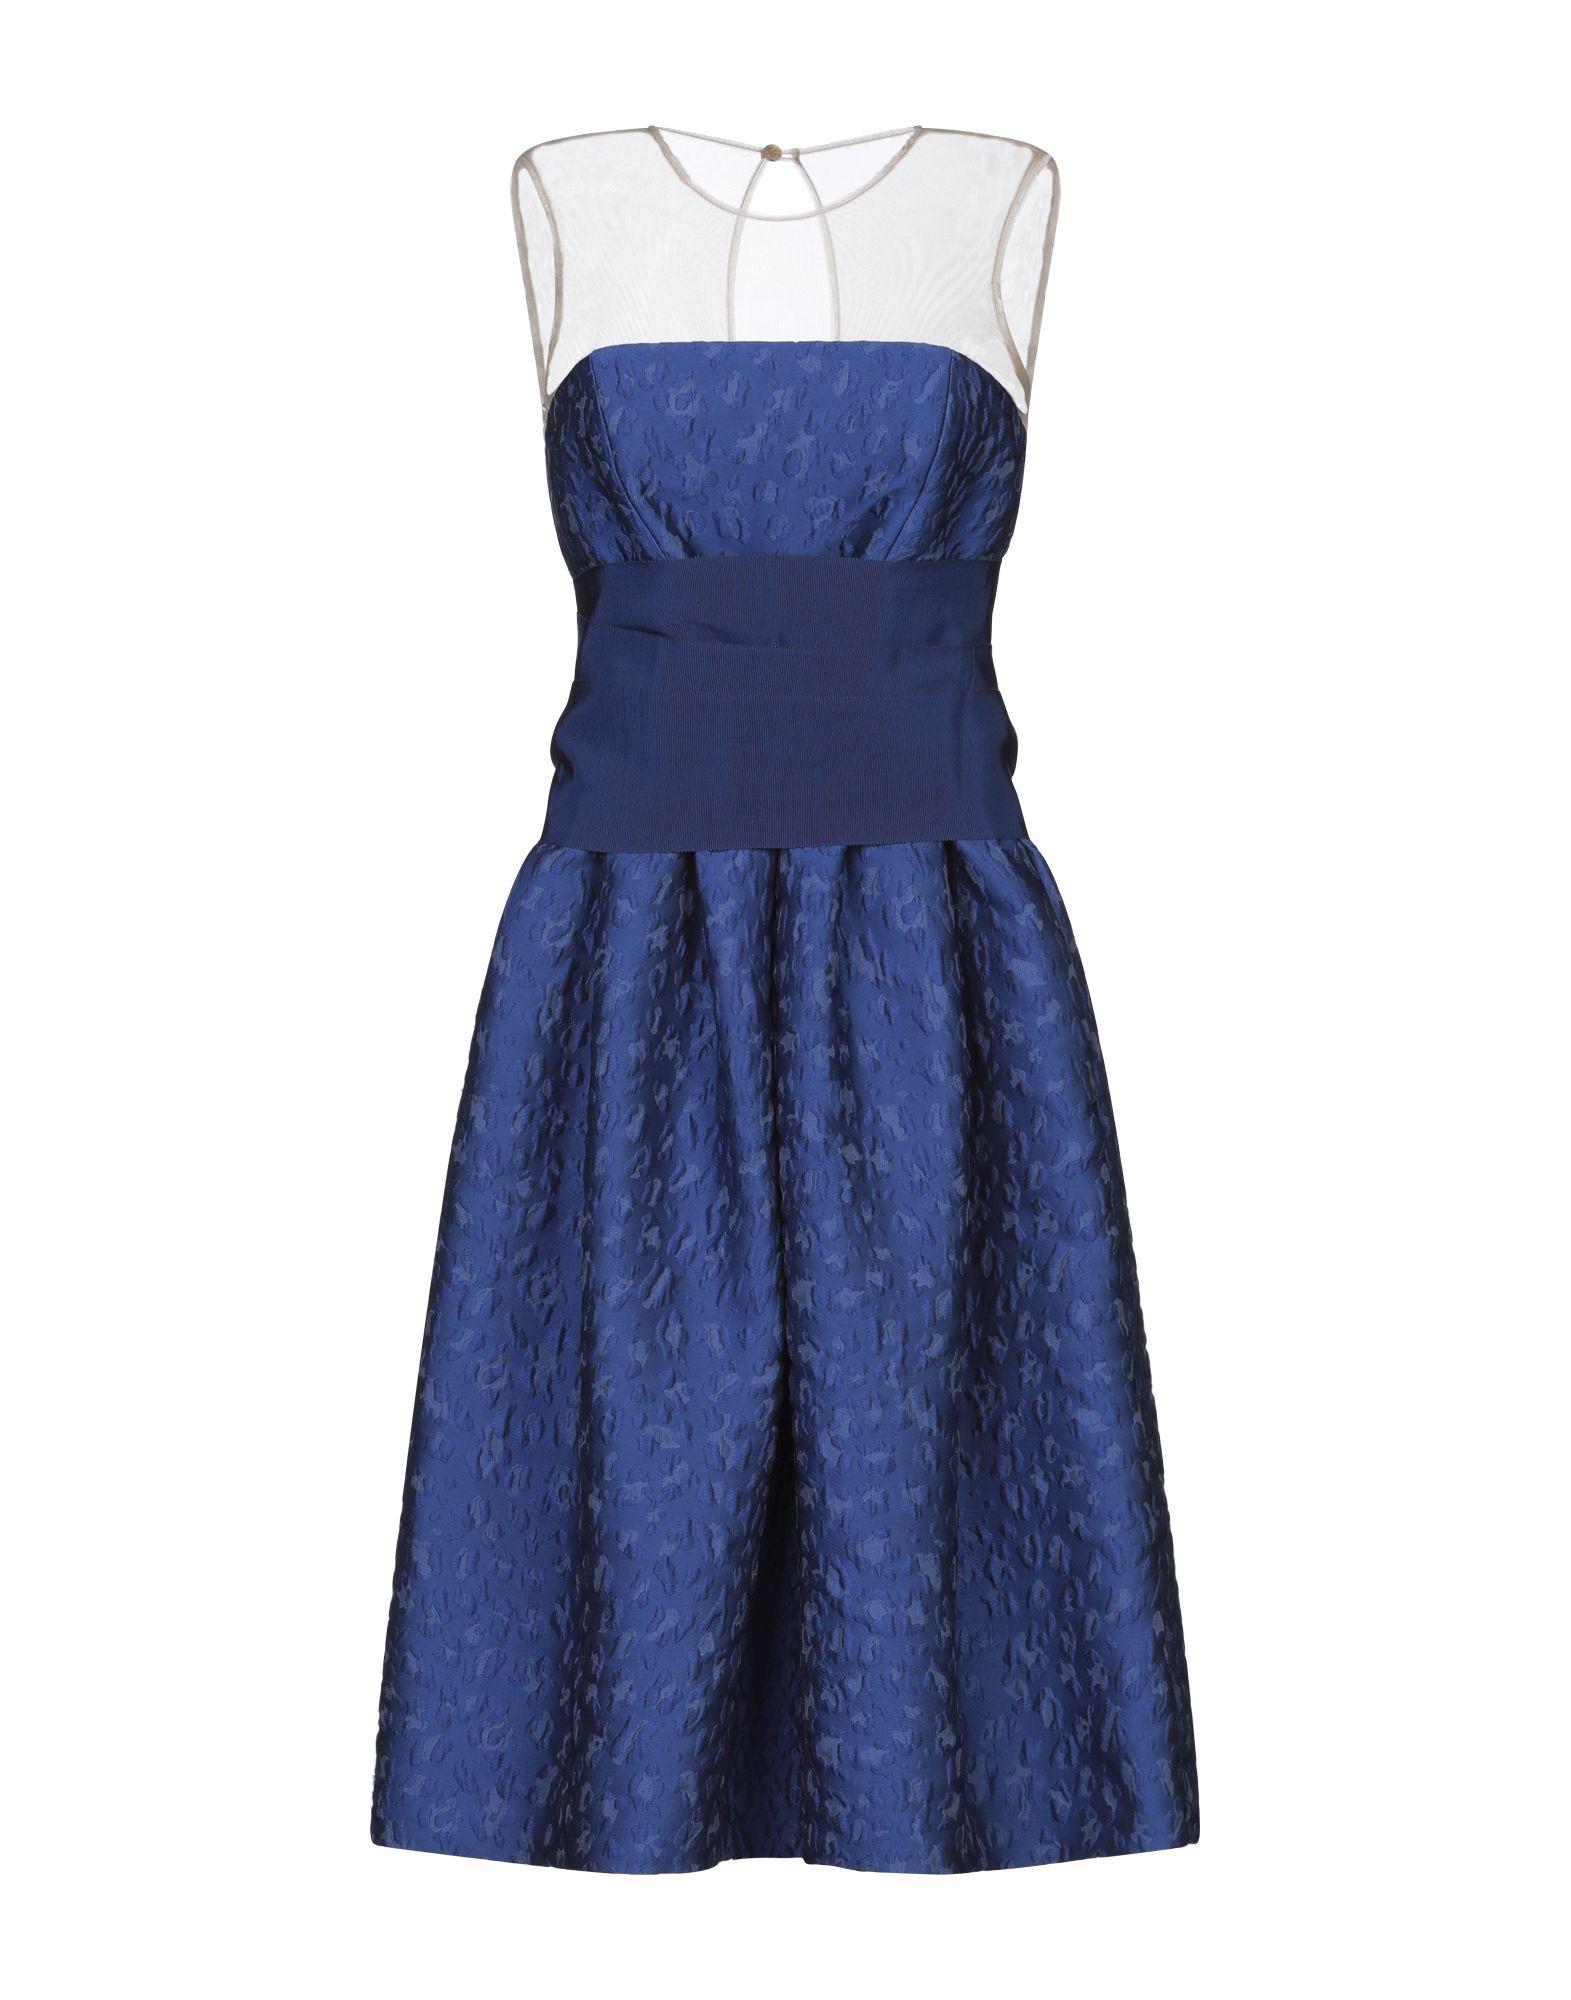 P.A.R.O.S.H. Synthetic Midi Dress in Blue - Lyst